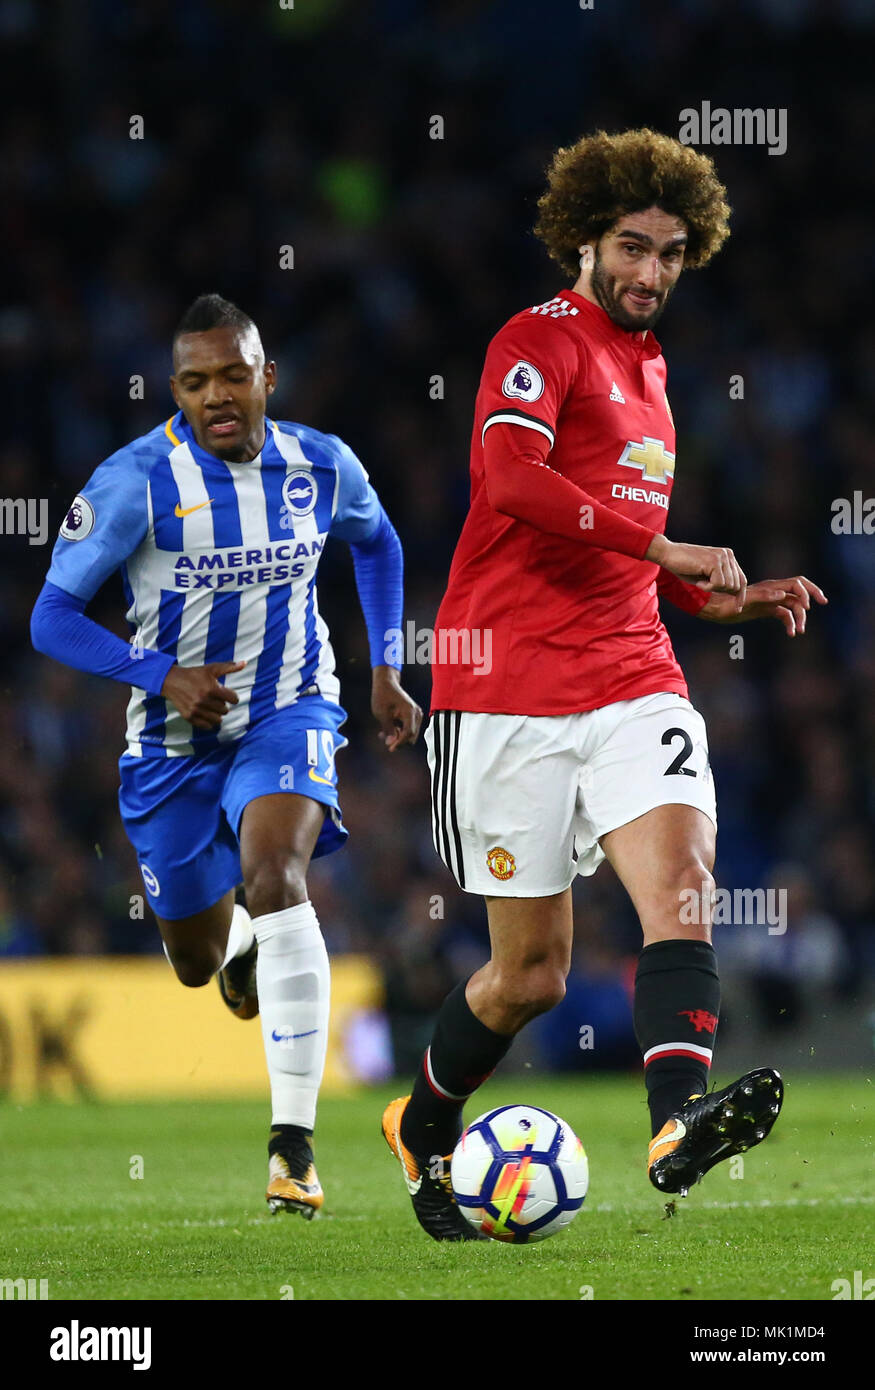 Marouane Fellaini of Manchester United  during the Premier League match between Brighton and Hove Albion and Manchester United at the American Express Community Stadium in Brighton and Hove. 04 May 2018 *** EDITORIAL USE ONLY ***  No merchandising. For Football images FA and Premier League restrictions apply inc. no internet/mobile usage without FAPL license - for details contact Football Dataco Stock Photo